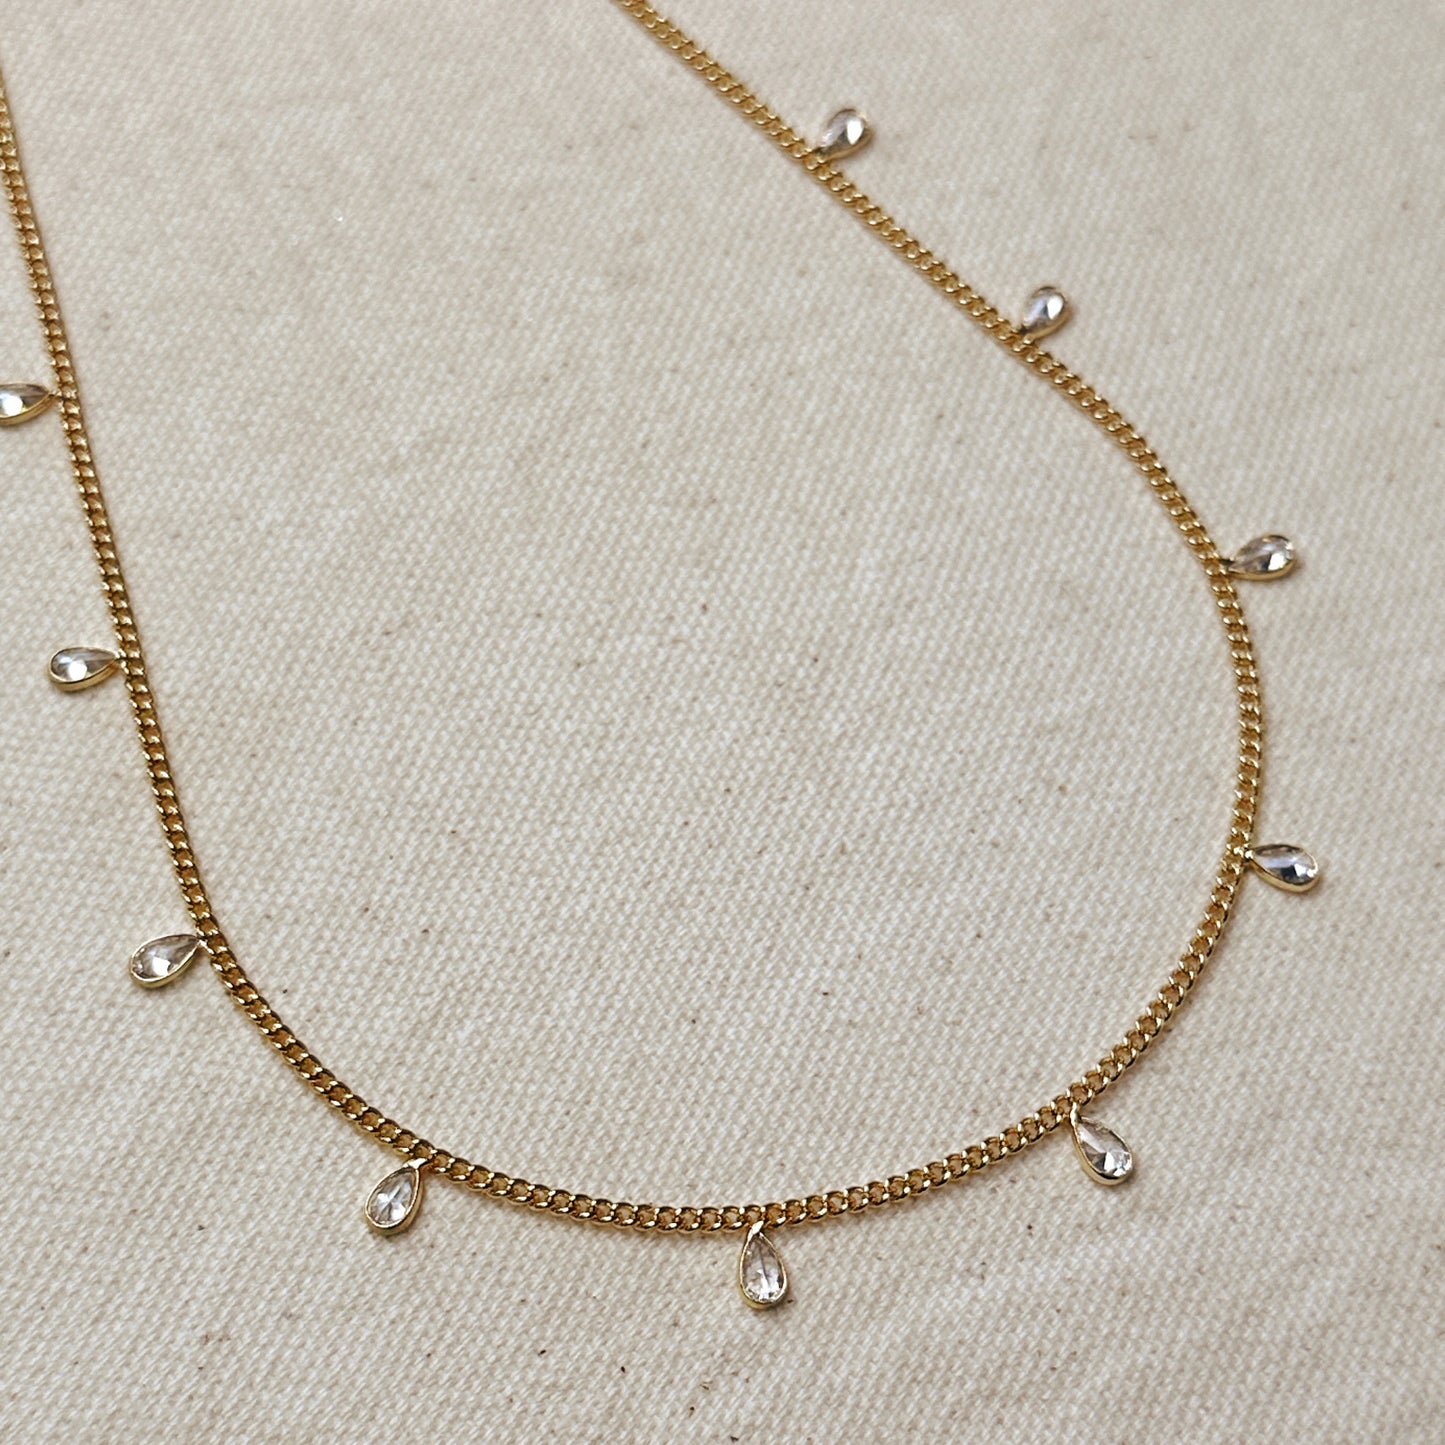 18k Gold Filled 2mm Curb Chain With Bezel CZ Drops Necklace